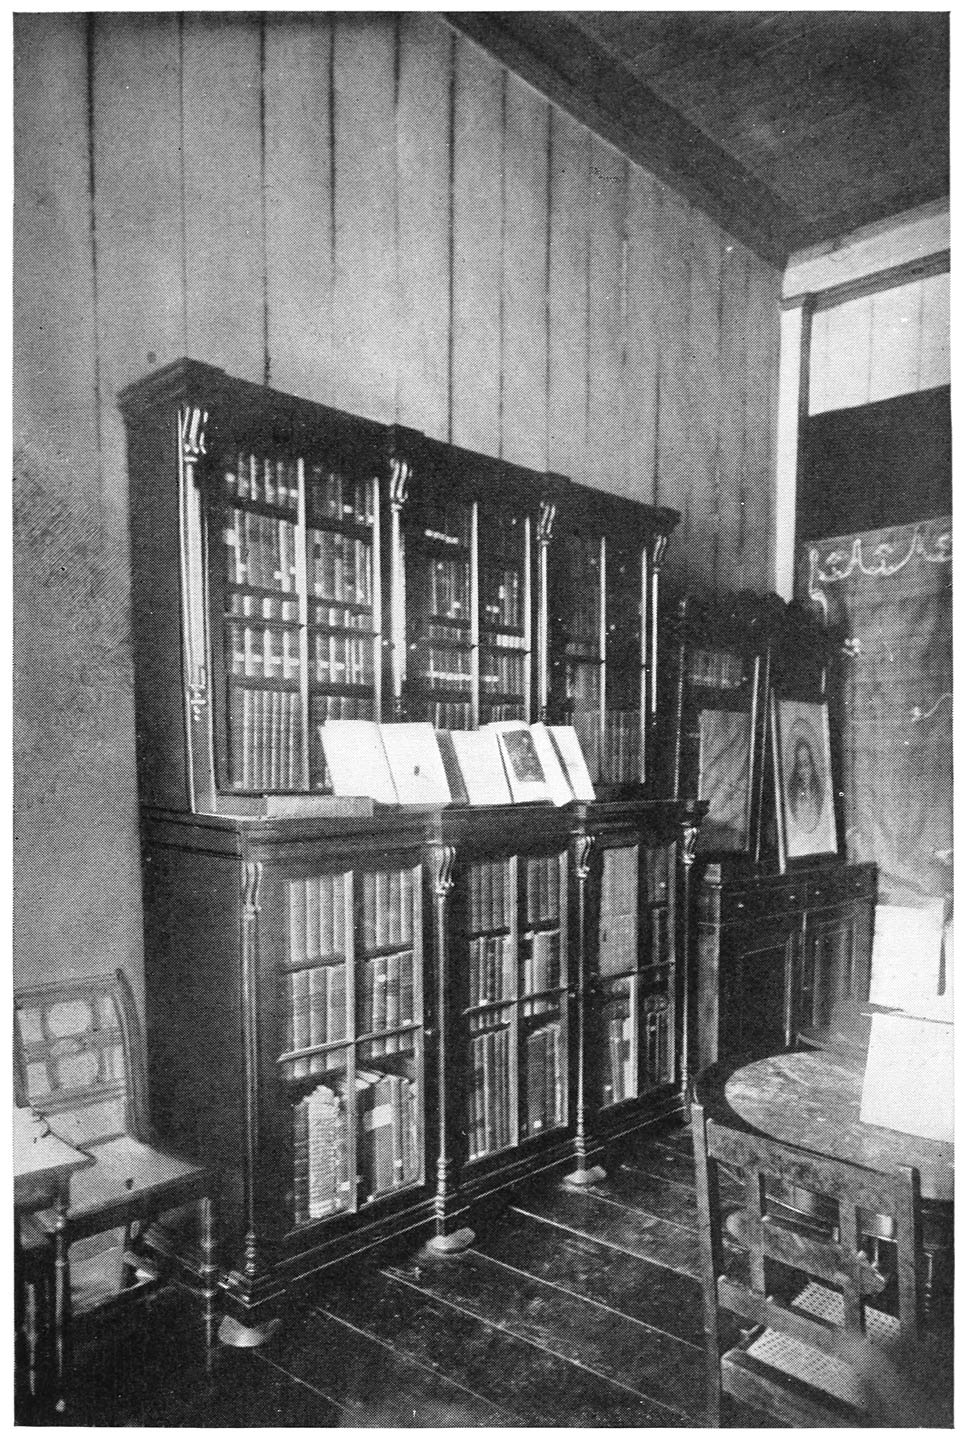 REMNANTS FROM RIZAL’S LIBRARY